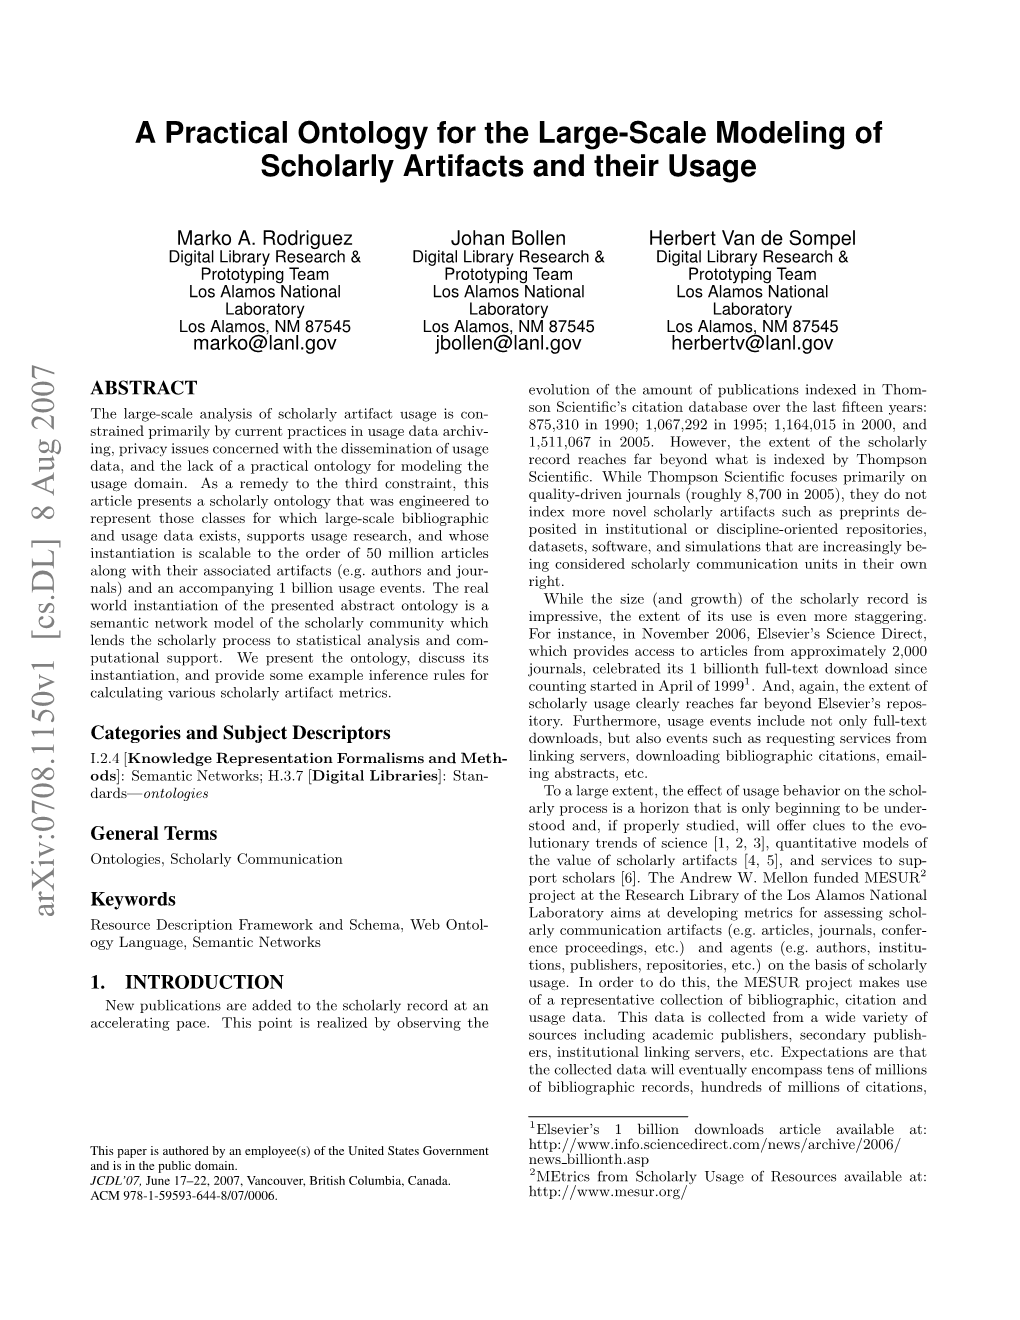 A Practical Ontology for the Large-Scale Modeling of Scholarly Artifacts and Their Usage